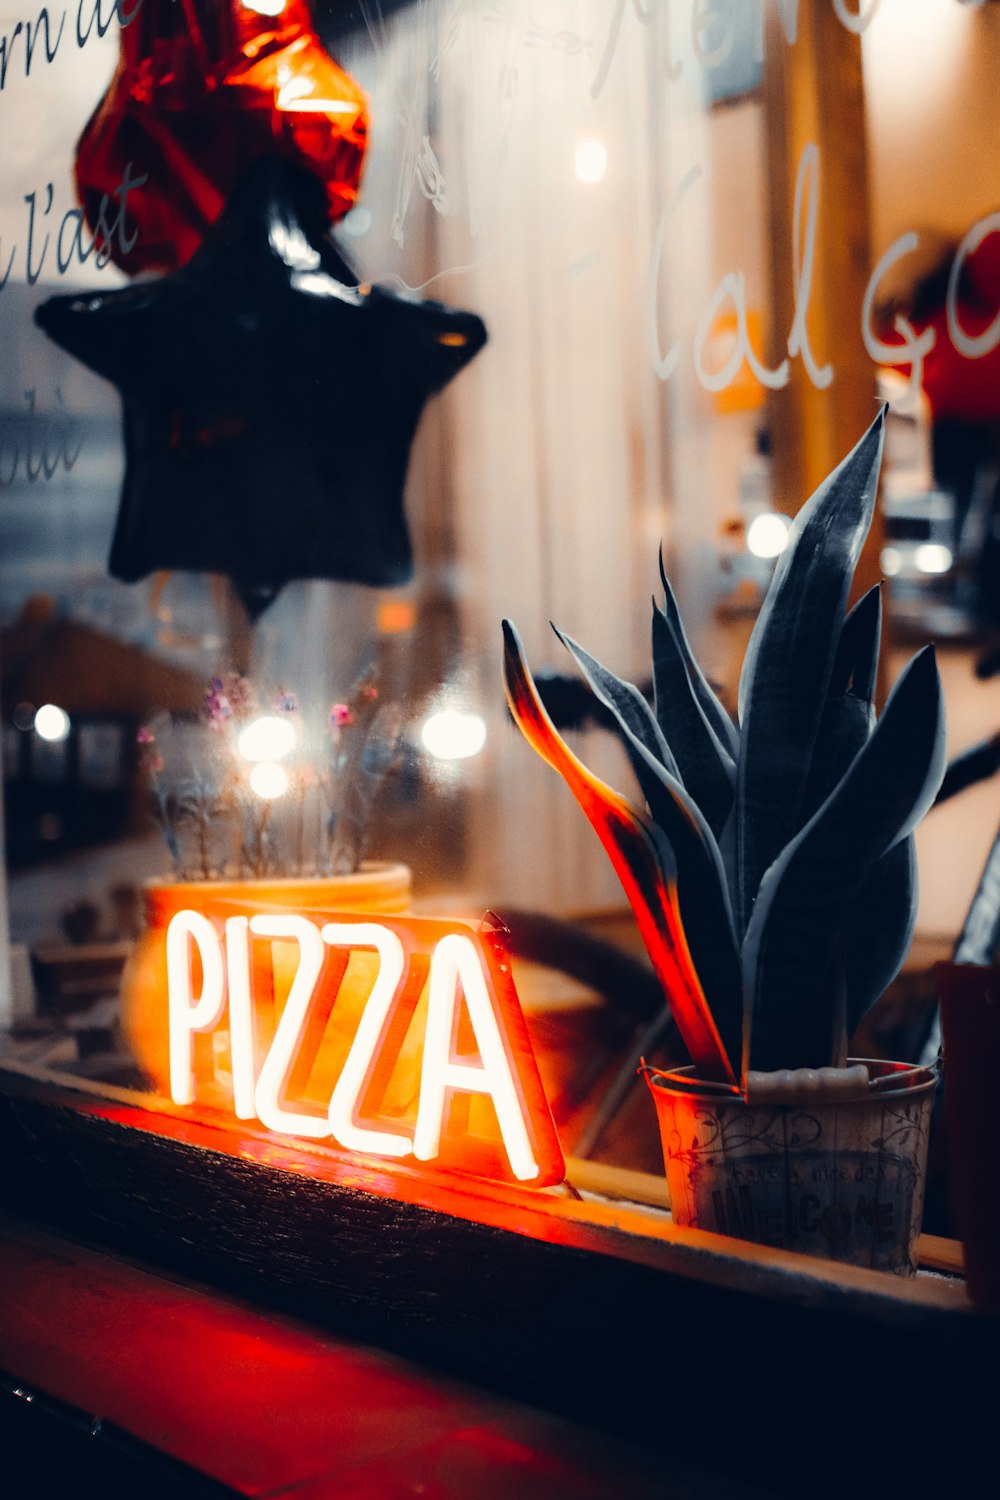 a neon sign that says pizza in a window